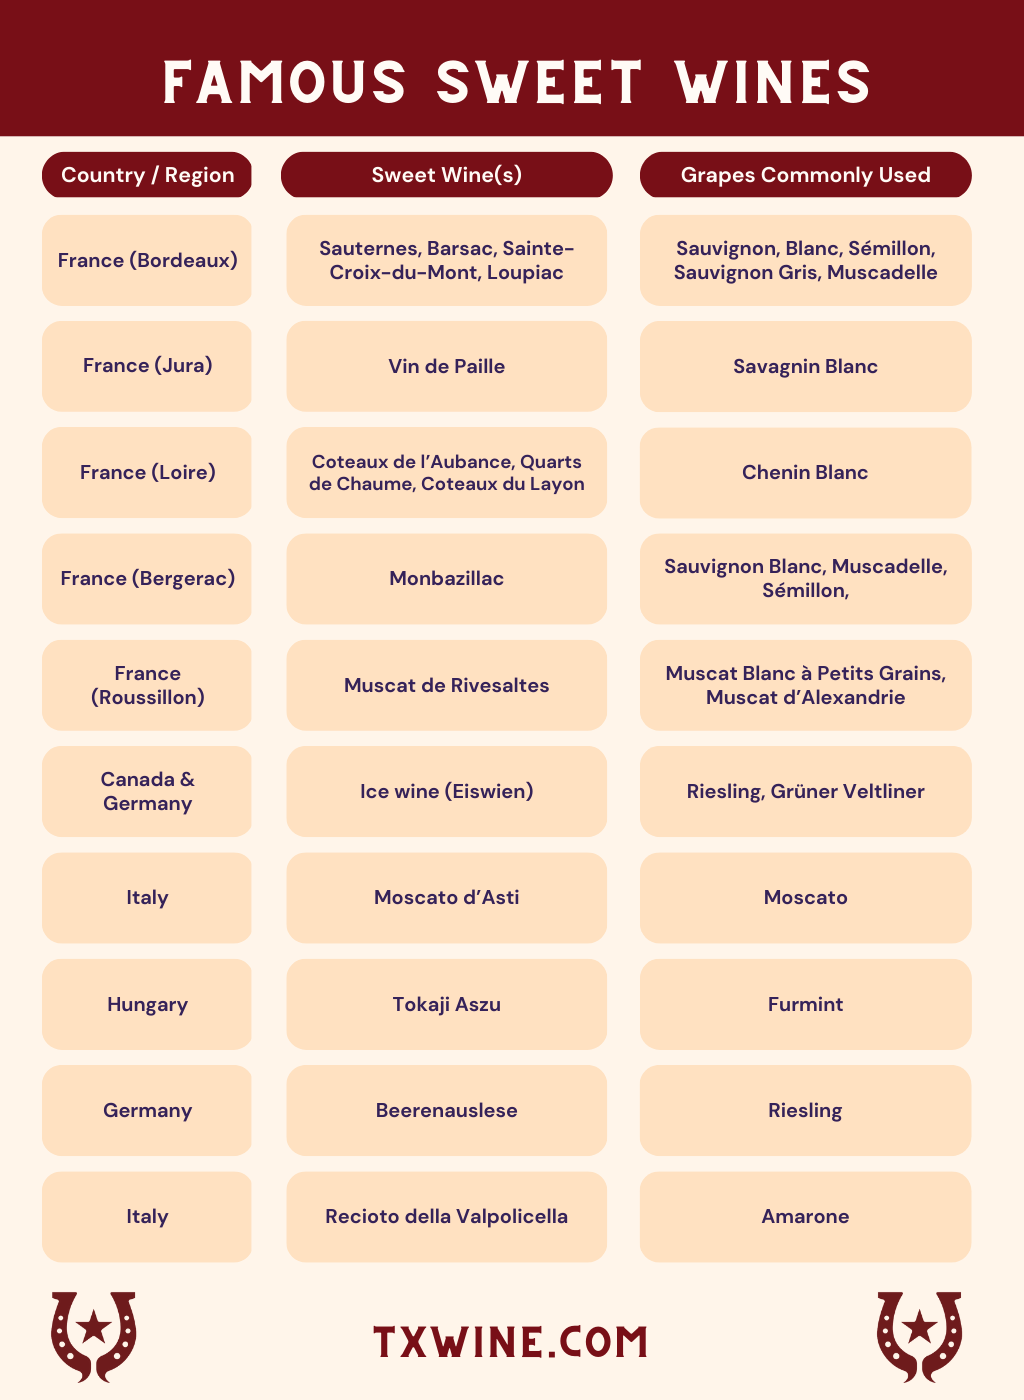 Dessert Wines - The Many Different Types Throughout The World